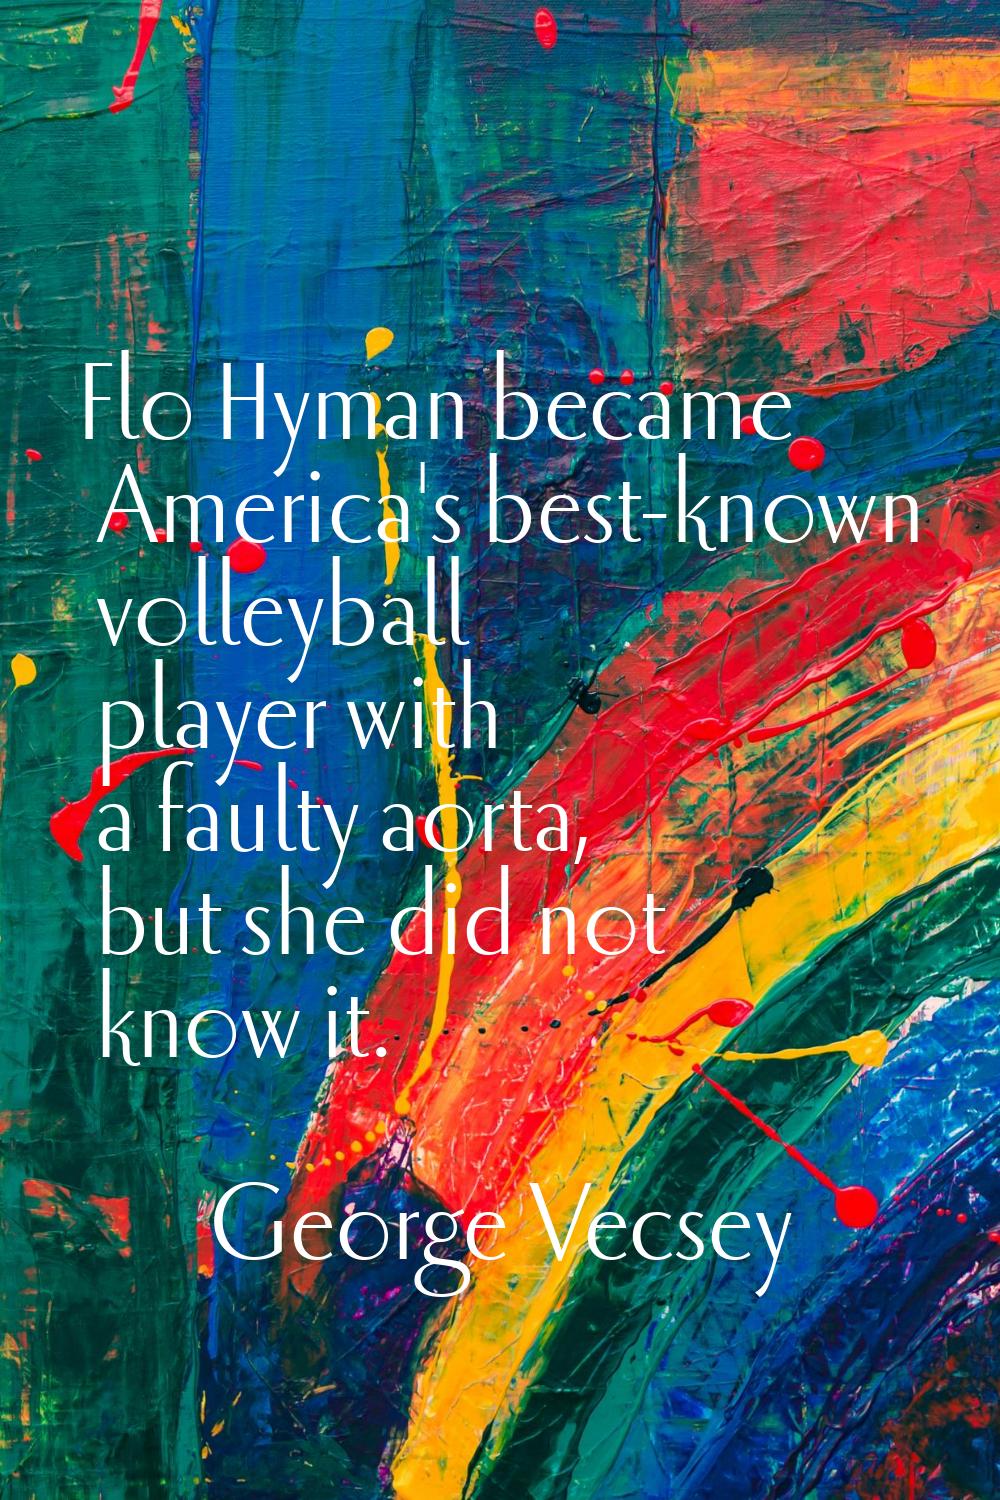 Flo Hyman became America's best-known volleyball player with a faulty aorta, but she did not know i